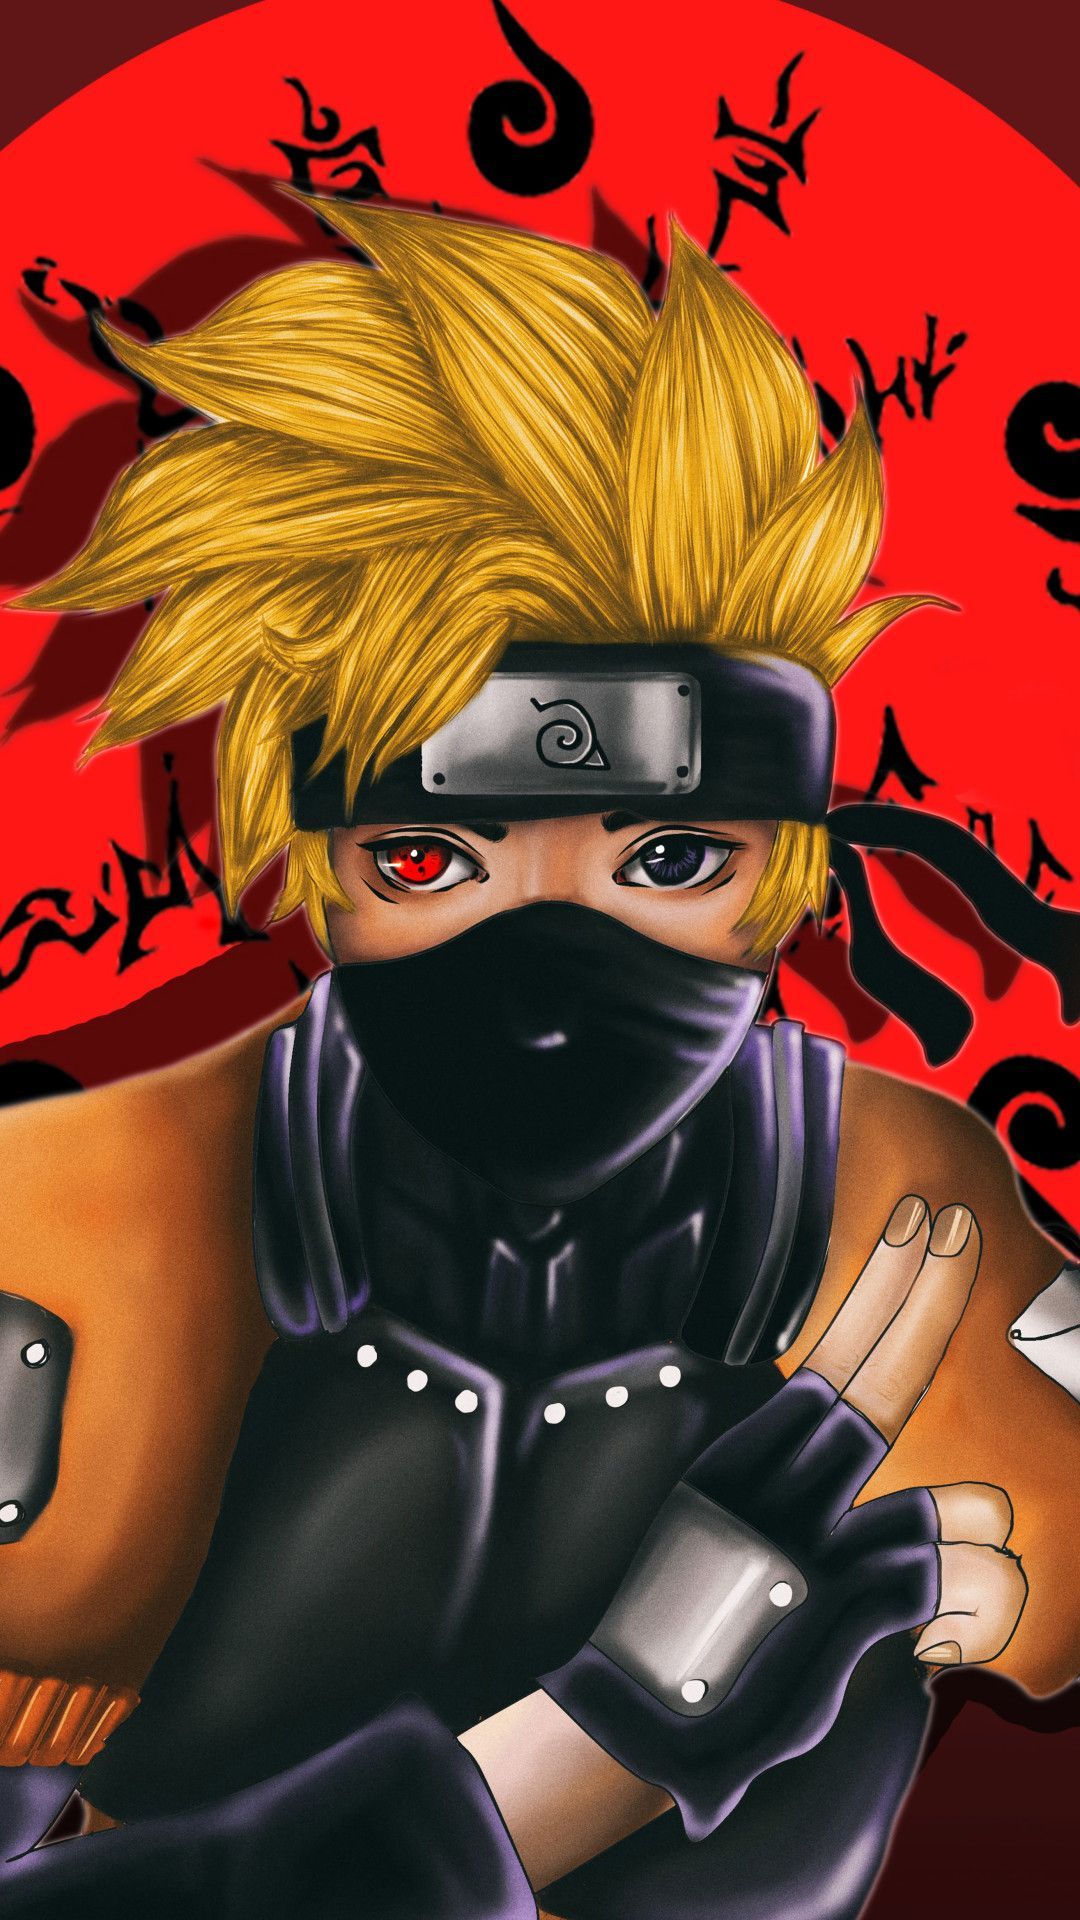 Naruto Wallpaper for mobile phone, tablet, desktop computer and other devices HD and 4K wallpaper. Naruto wallpaper, Naruto, Naruto uzumaki hokage